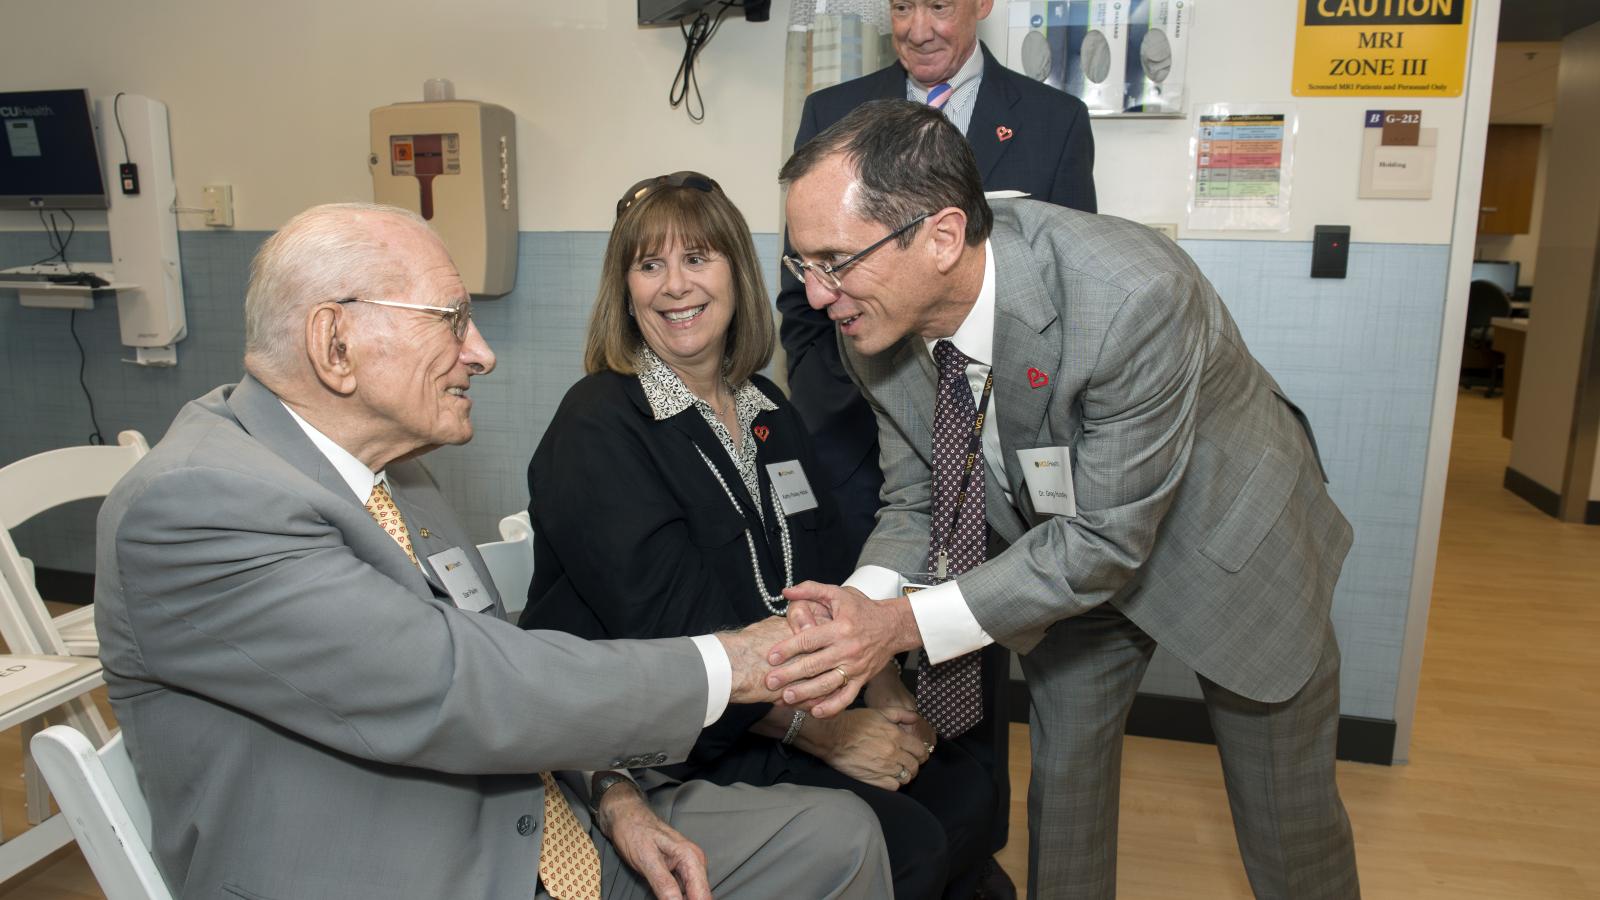 Stan Pauley (left) greets William Hundley, M.D., director of the Pauley Heart Center, before the ribbon cutting at VCU Health’s new Cardiac Imaging Suite. Kathy Pauley Hickok and Gene Hickok look on. In addition to making a generous donation to name the Pauley Heart Center in 2006, the Pauley Family Foundation supported Dr. Hundley’s recruitment and funded a portion of the suite’s equipment. Photo: Kevin Morley, VCU University Marketing